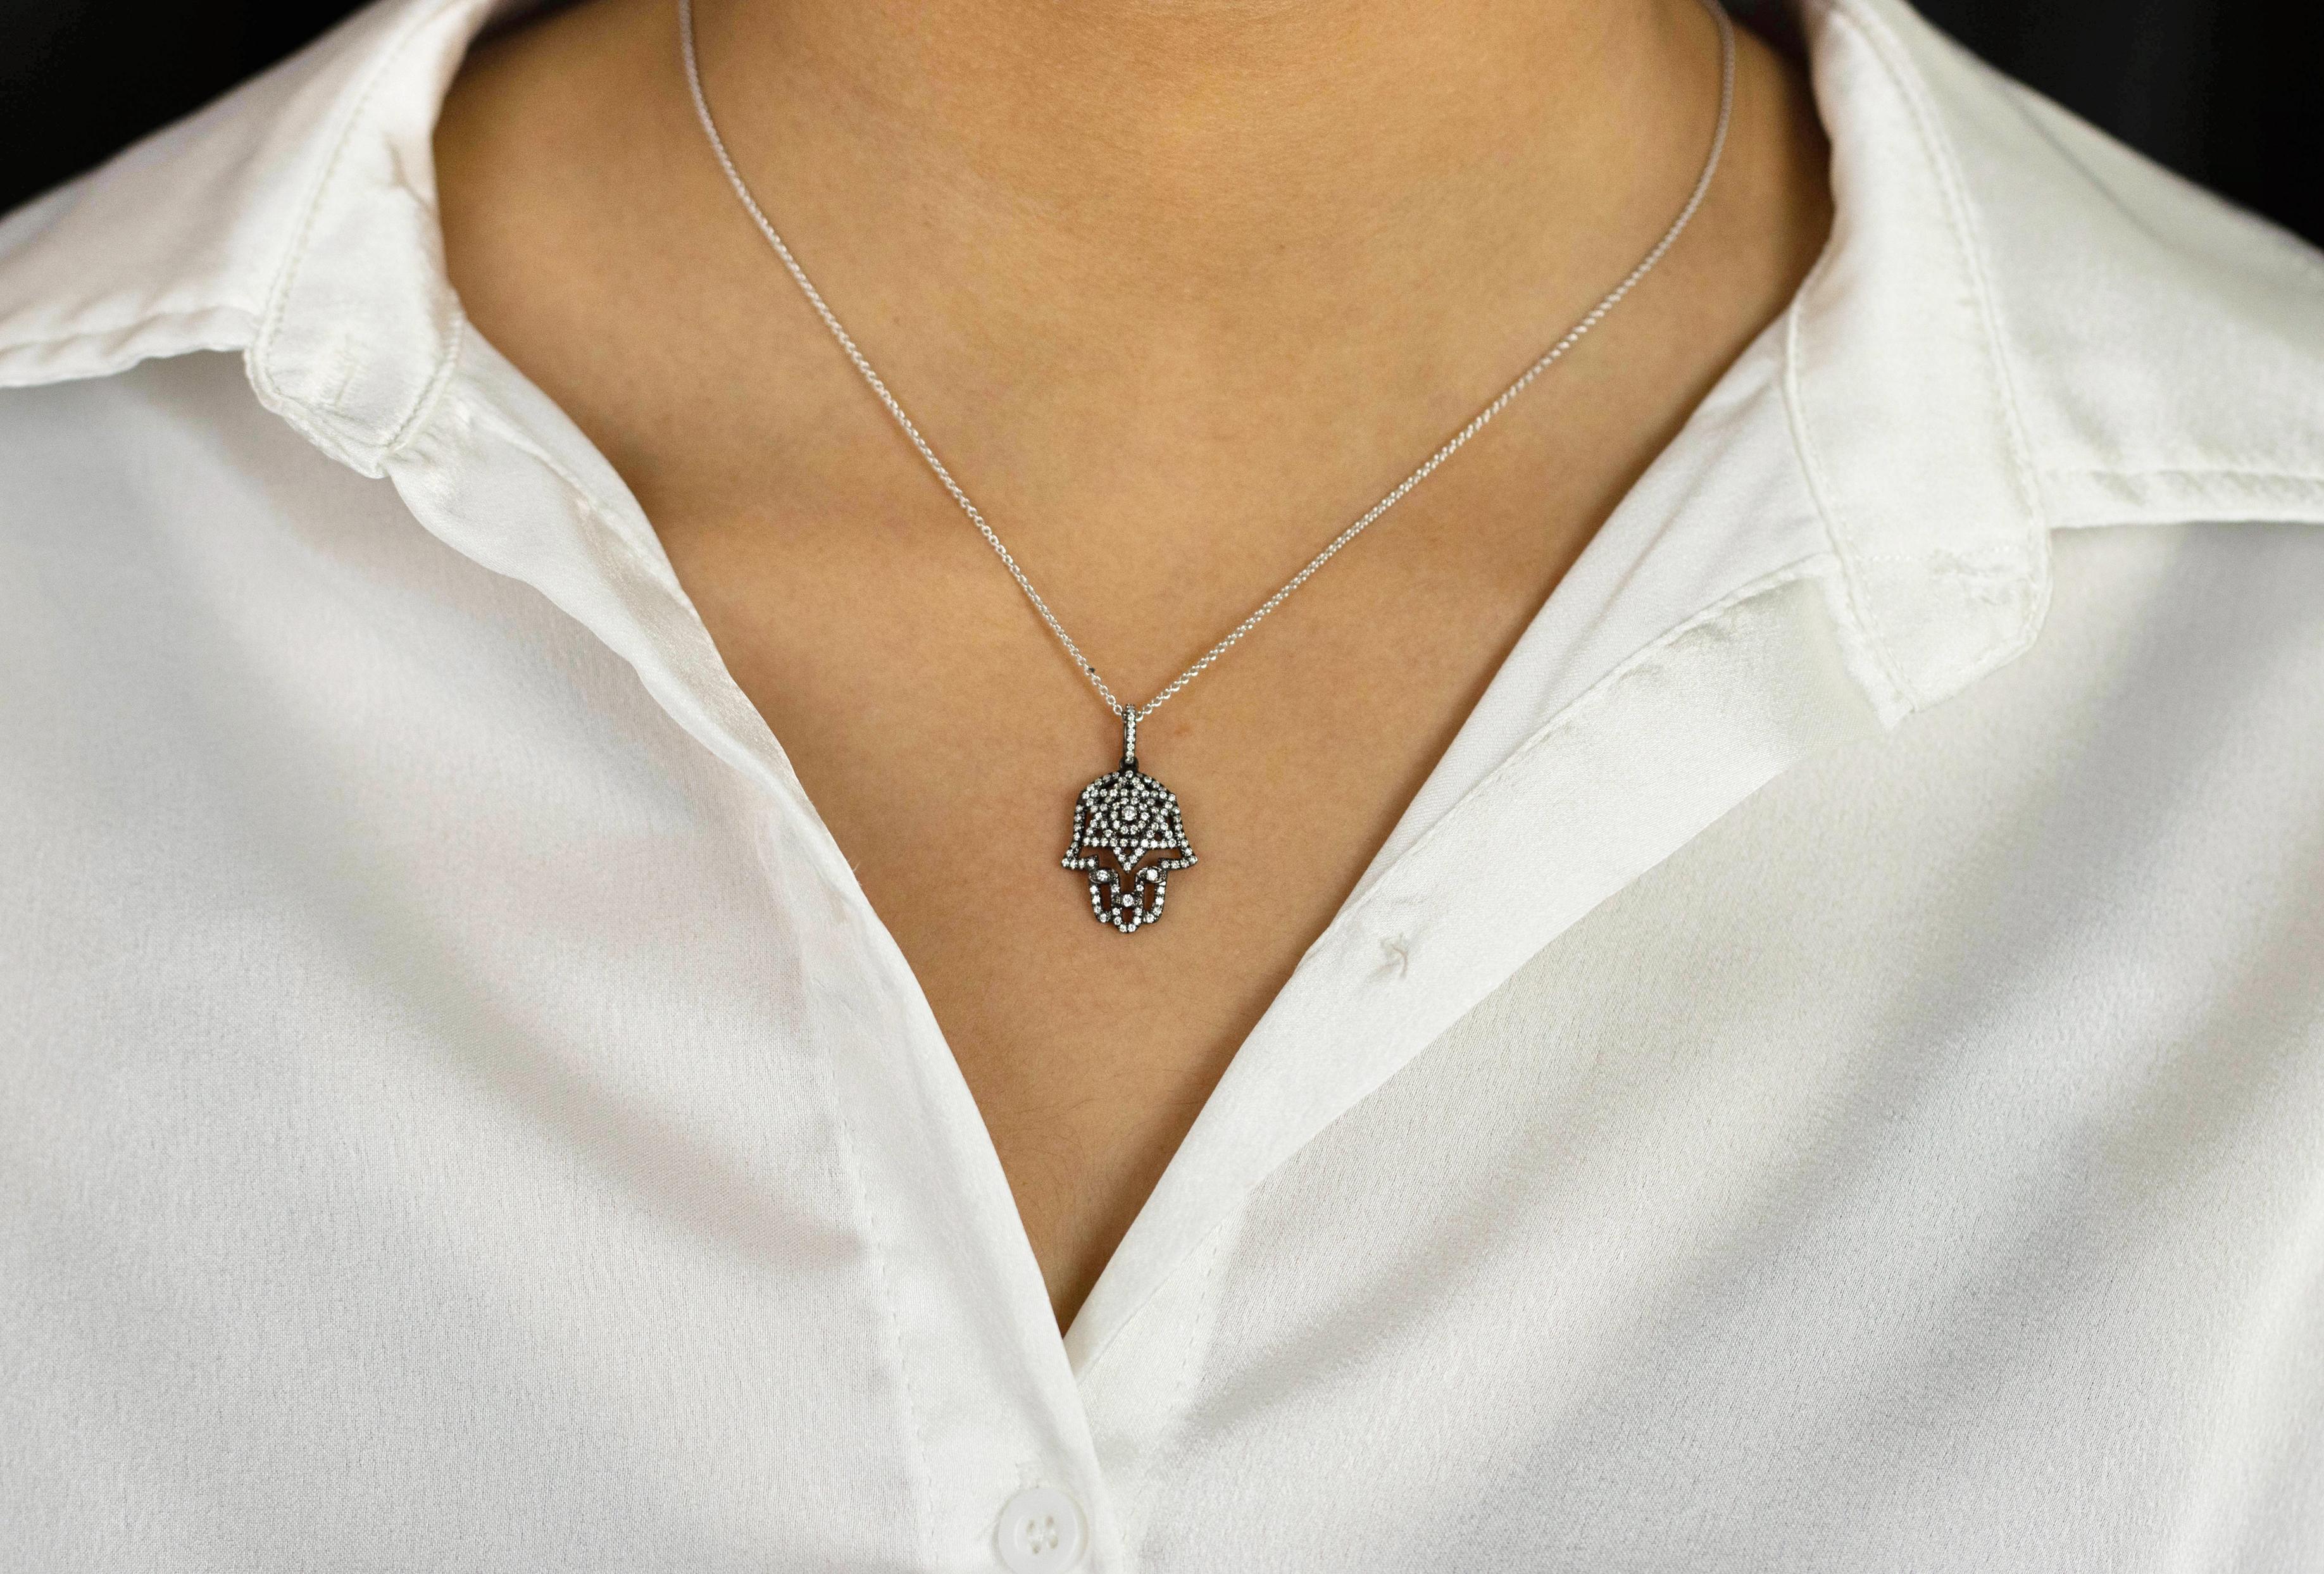 A hamsa pendant necklace showcasing a hand with a six-point star in the middle, encrusted with round brilliant diamonds. Attached to an diamond encrusted bale. Diamonds weigh 0.40 carats total. Black rhodium-plated and attached to a 16 inches